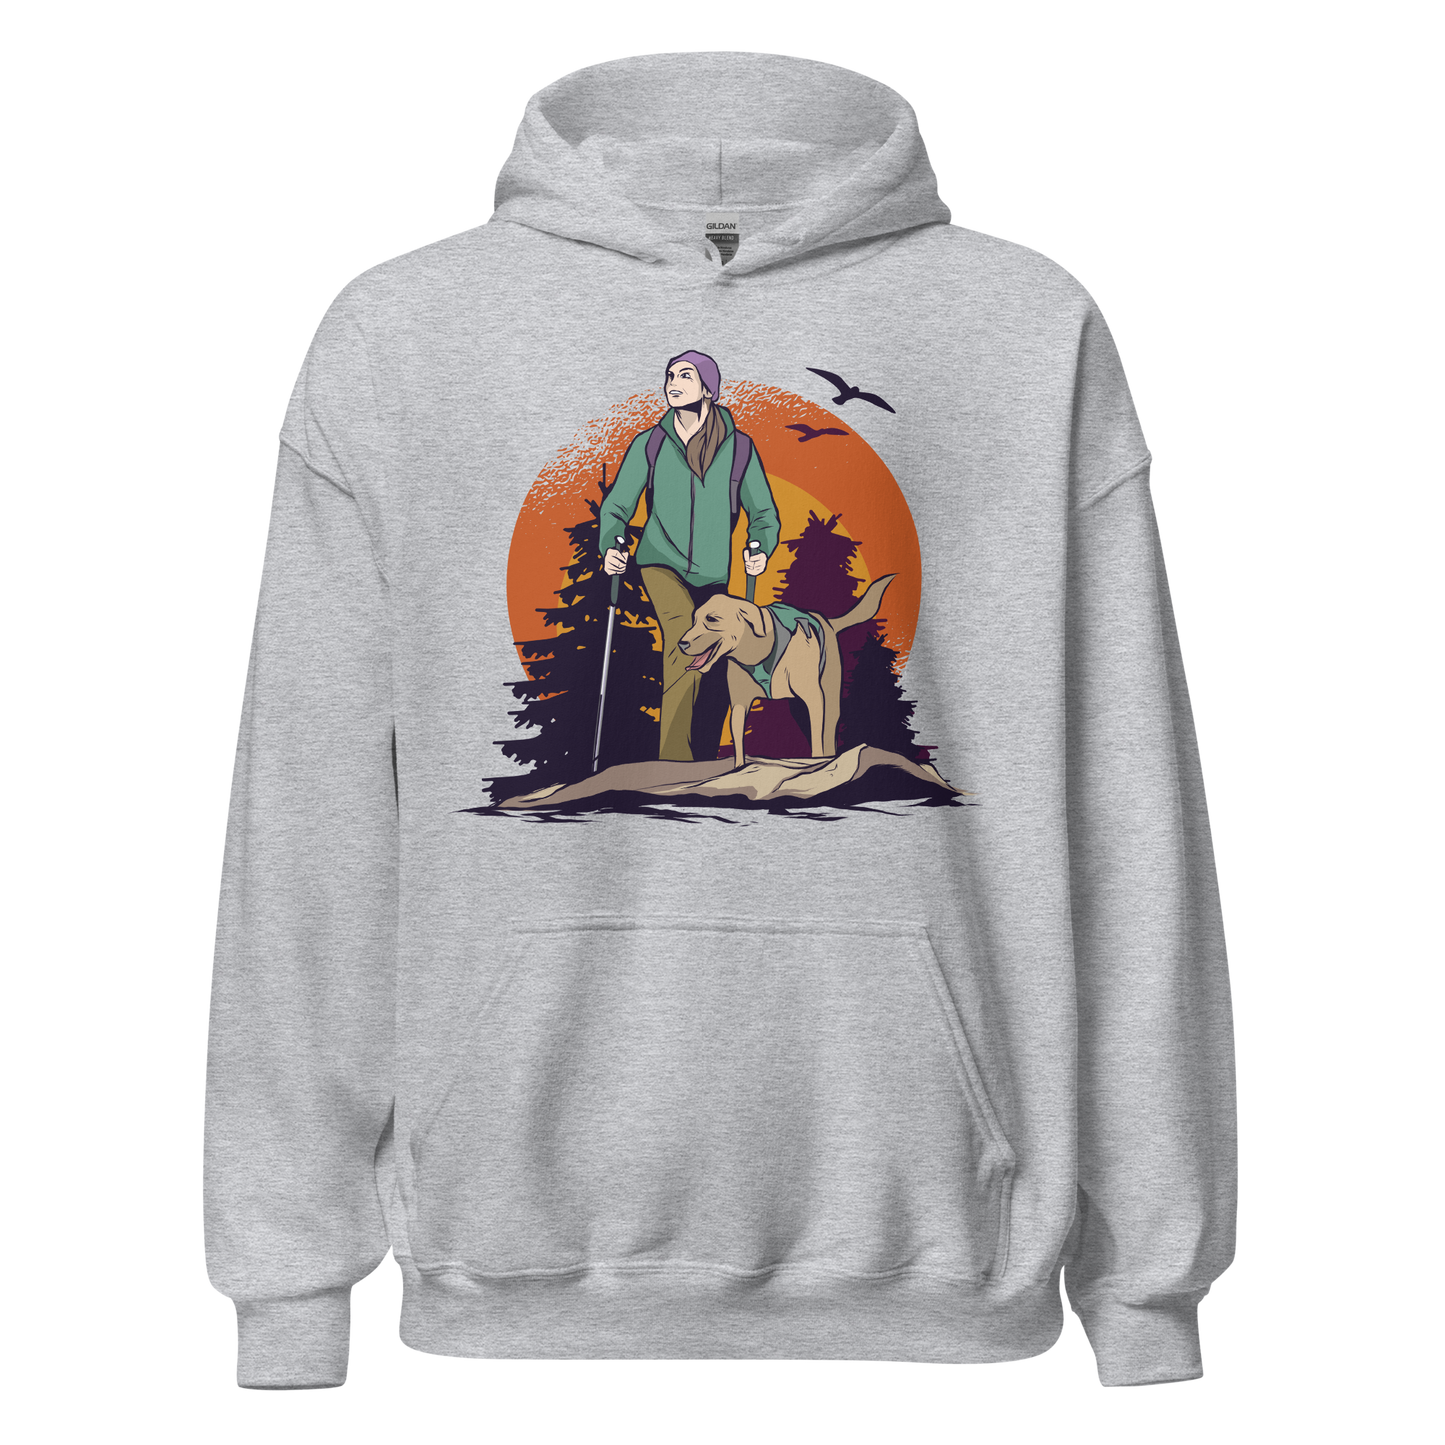 Hiking Forest | Unisex Hoodie